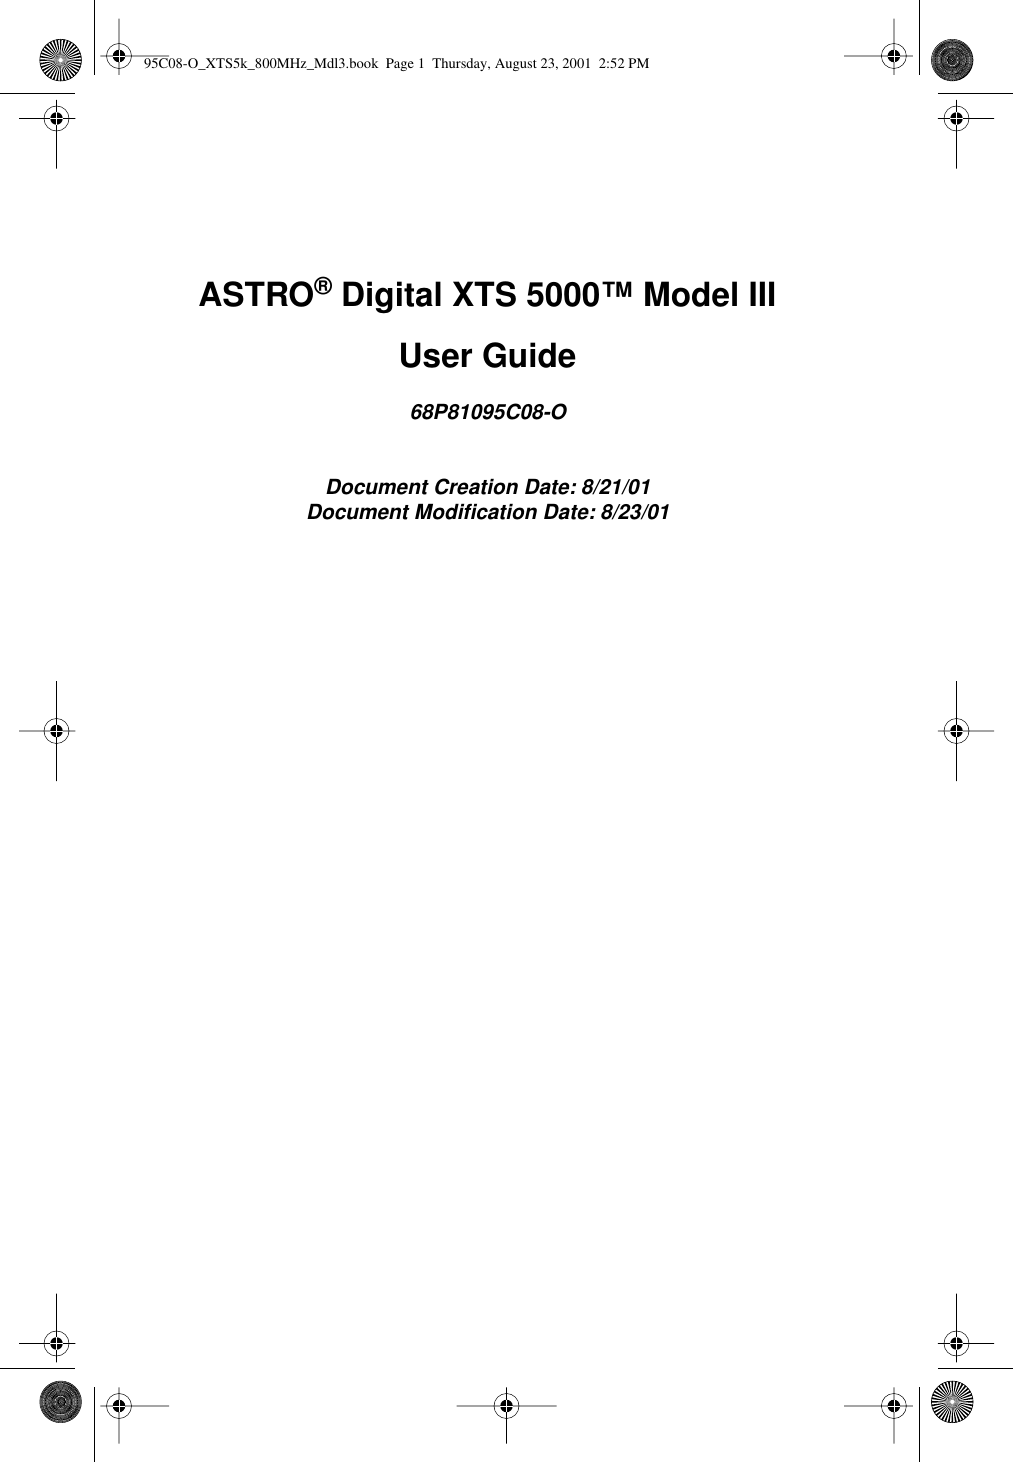  ASTRO ®  Digital XTS 5000™ Model III User Guide 68P81095C08-ODocument Creation Date: 8/21/01Document Modiﬁcation Date: 8/23/01 95C08-O_XTS5k_800MHz_Mdl3.book  Page 1  Thursday, August 23, 2001  2:52 PM